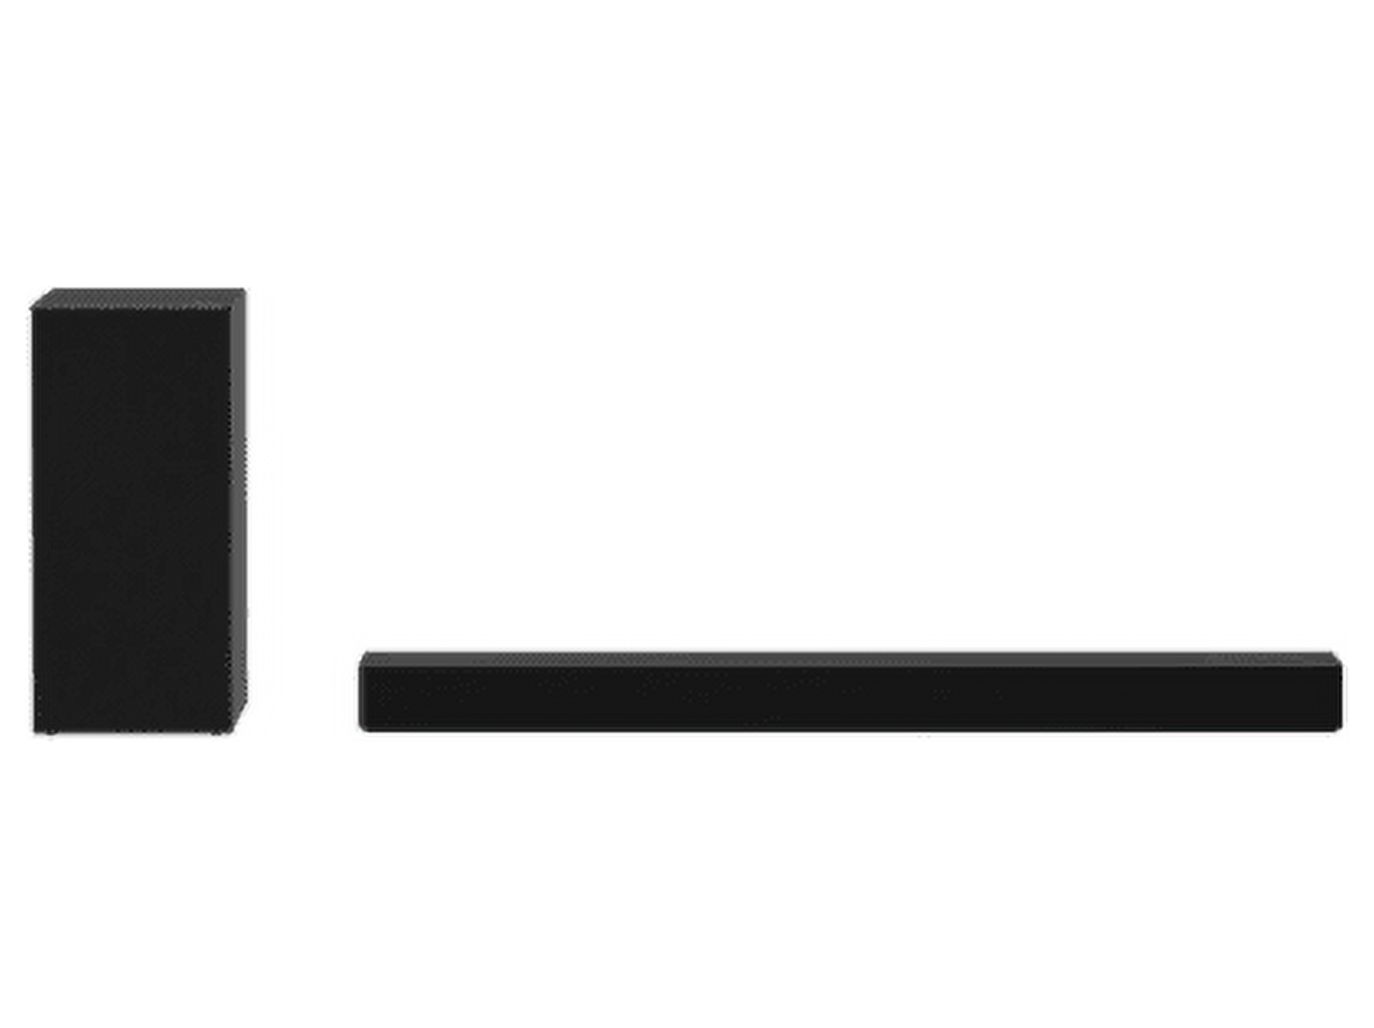 Restored Lg SPD7Y 3.1.2 Channel HighResolution Audio Sound Bar with Dolby Atmos (Refurbished) - image 1 of 3